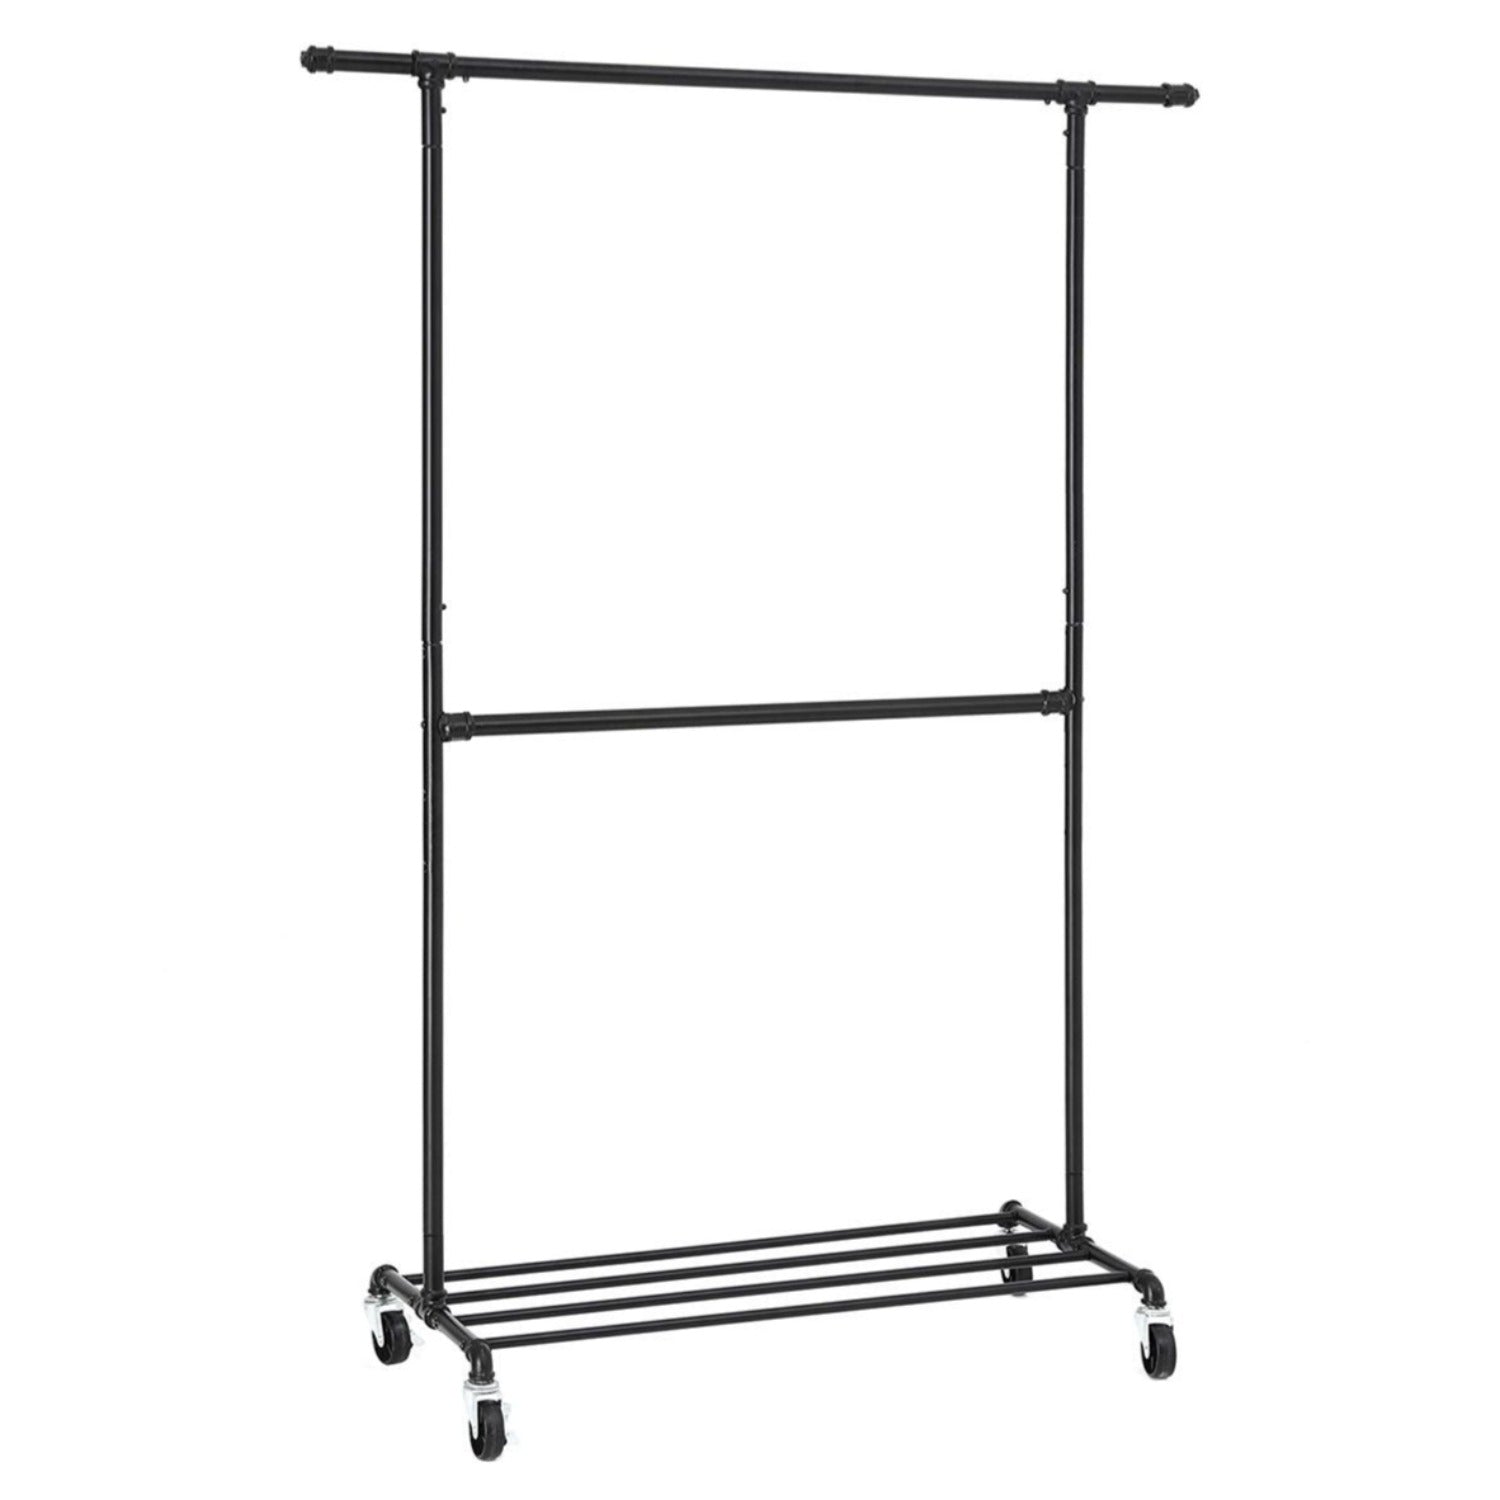 Clothes Rail, Coat Rack with Shoe Storage, Industrial Clothes Rail, on Wheels, Maximum load of 110 Kg, Black, SONGMICS, 2